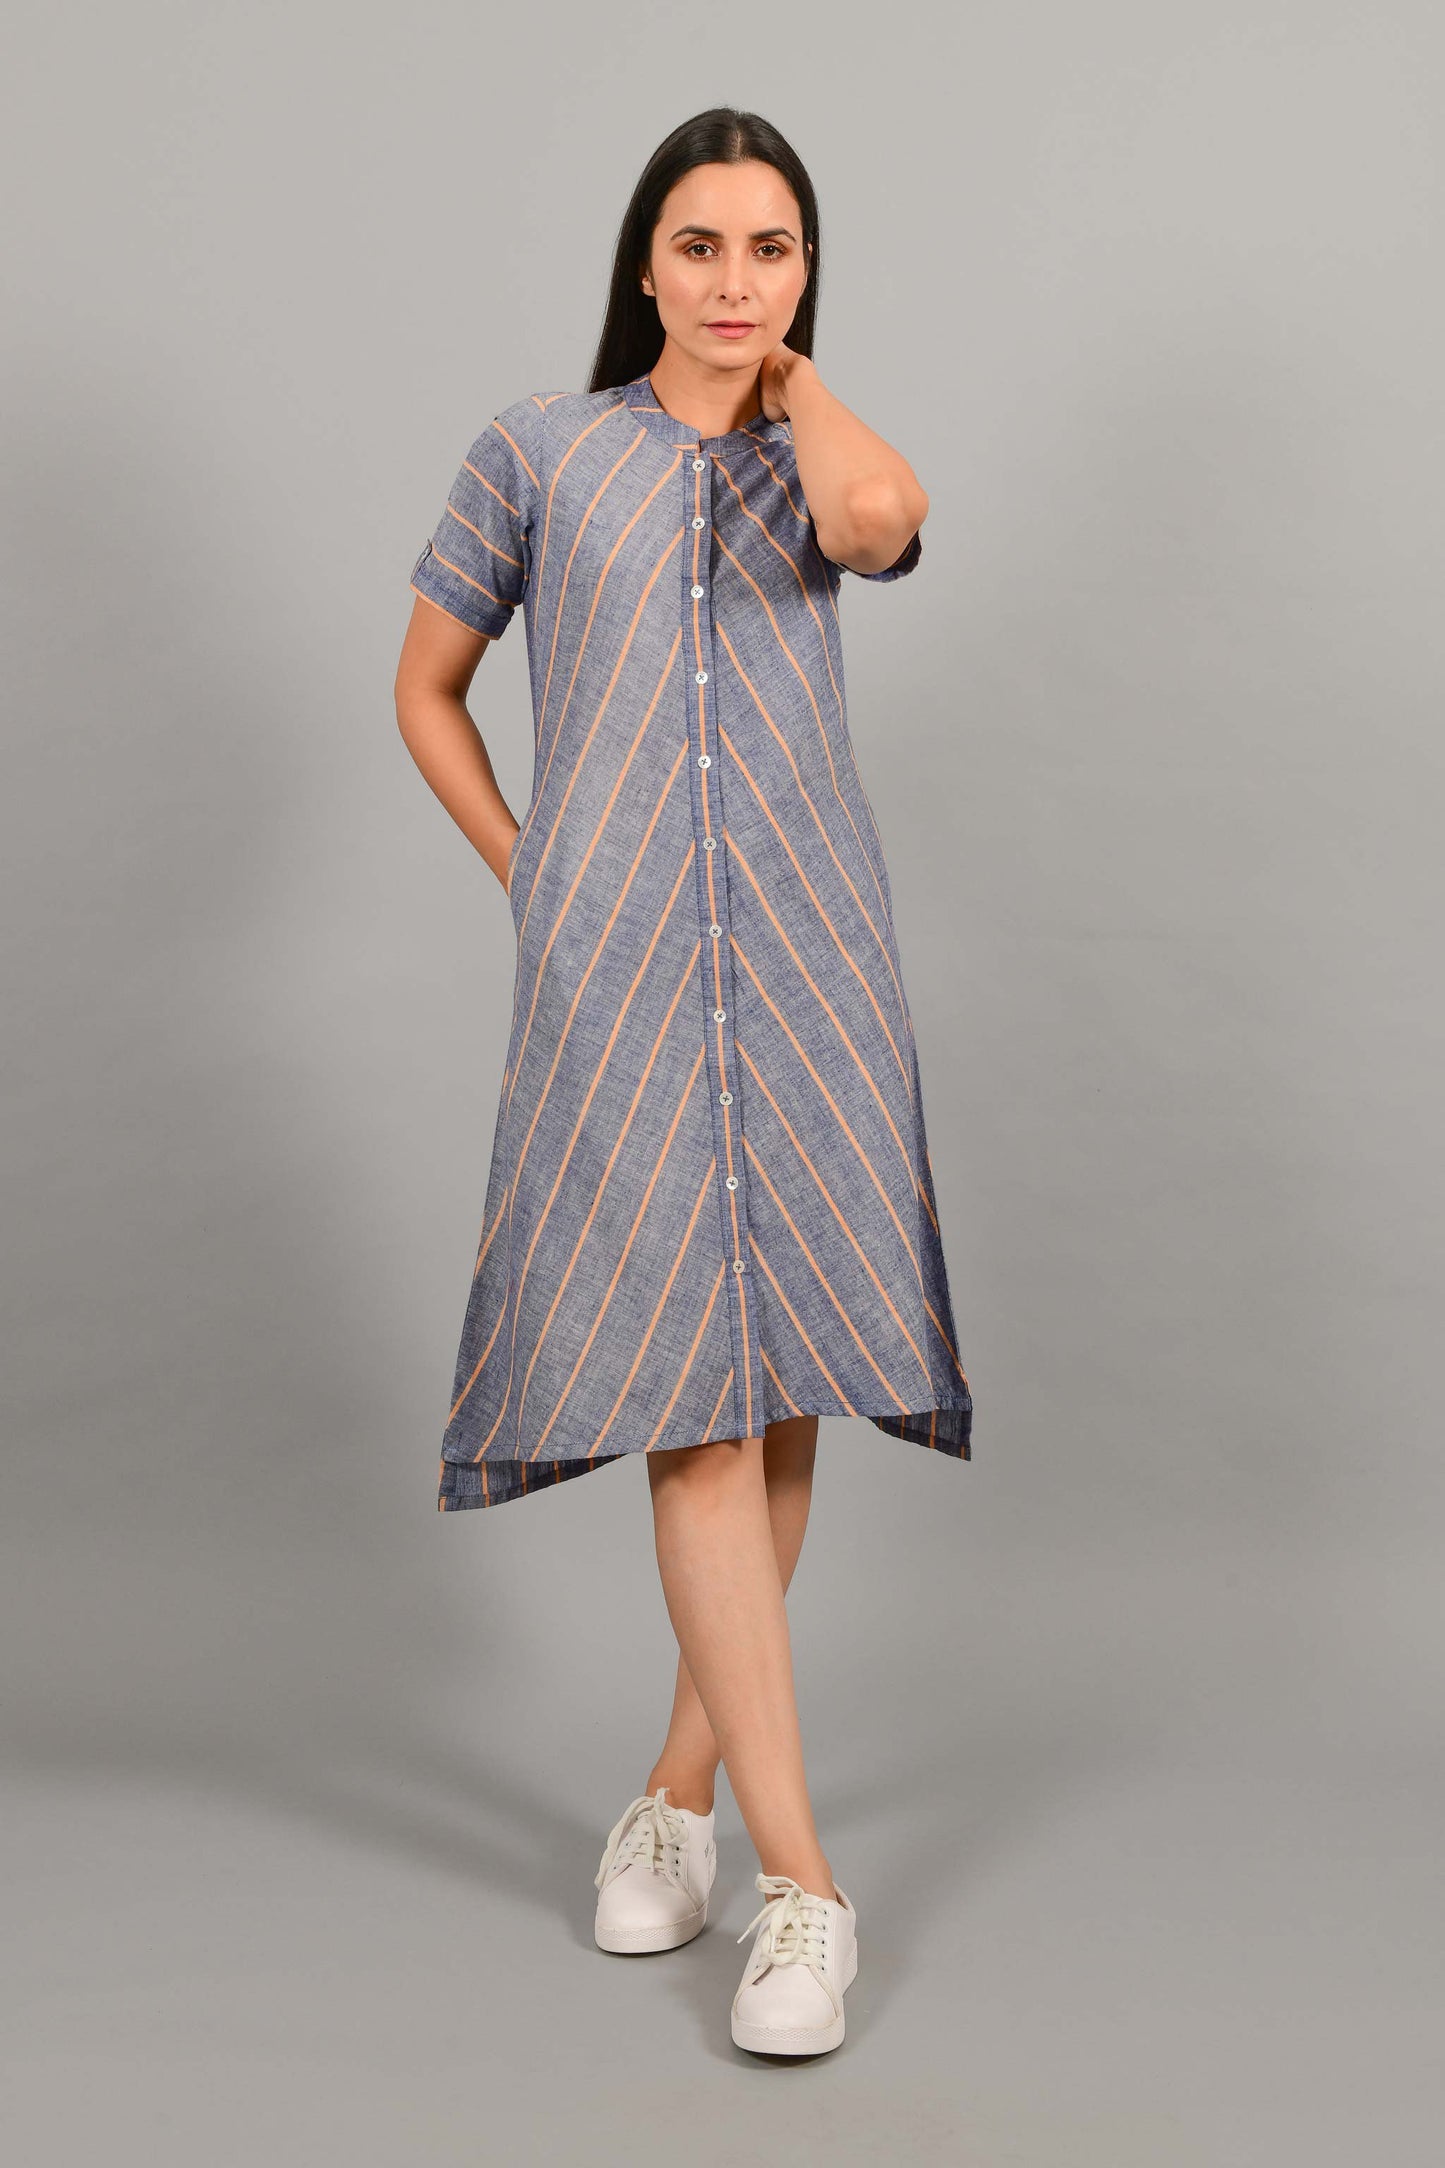 Front pose of an Indian female womenswear fashion model in a Blue chambray with orange stripes handspun and handwoven khadi cotton dress-kurta by Cotton Rack.